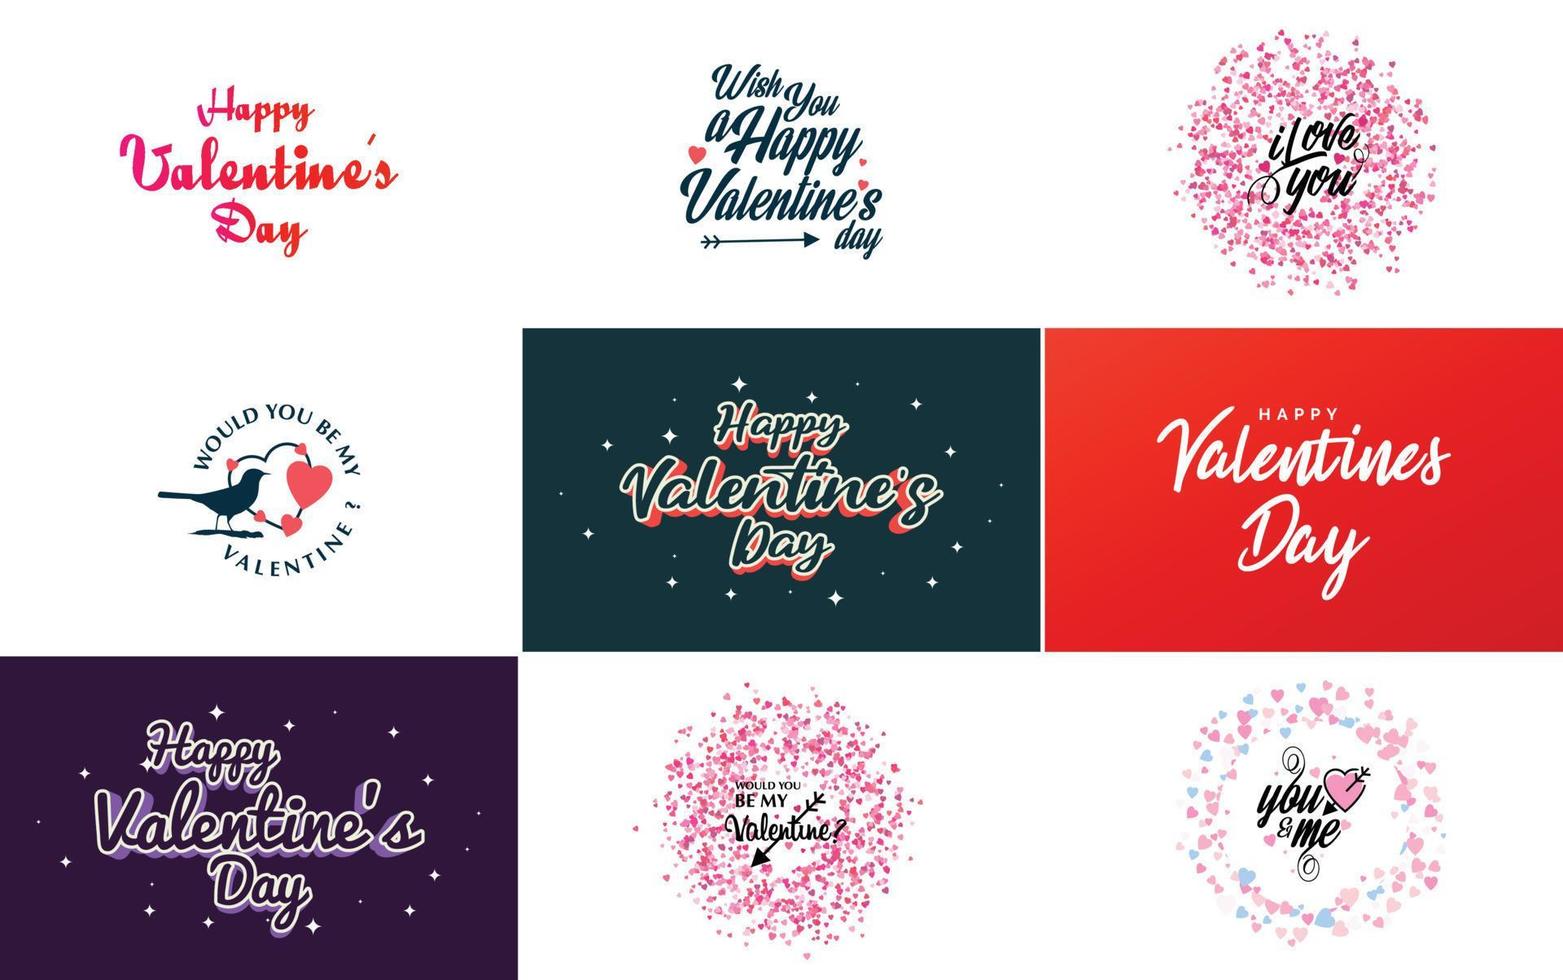 Vector illustration of set of cards with hearts and wreaths with Valentine's Day text